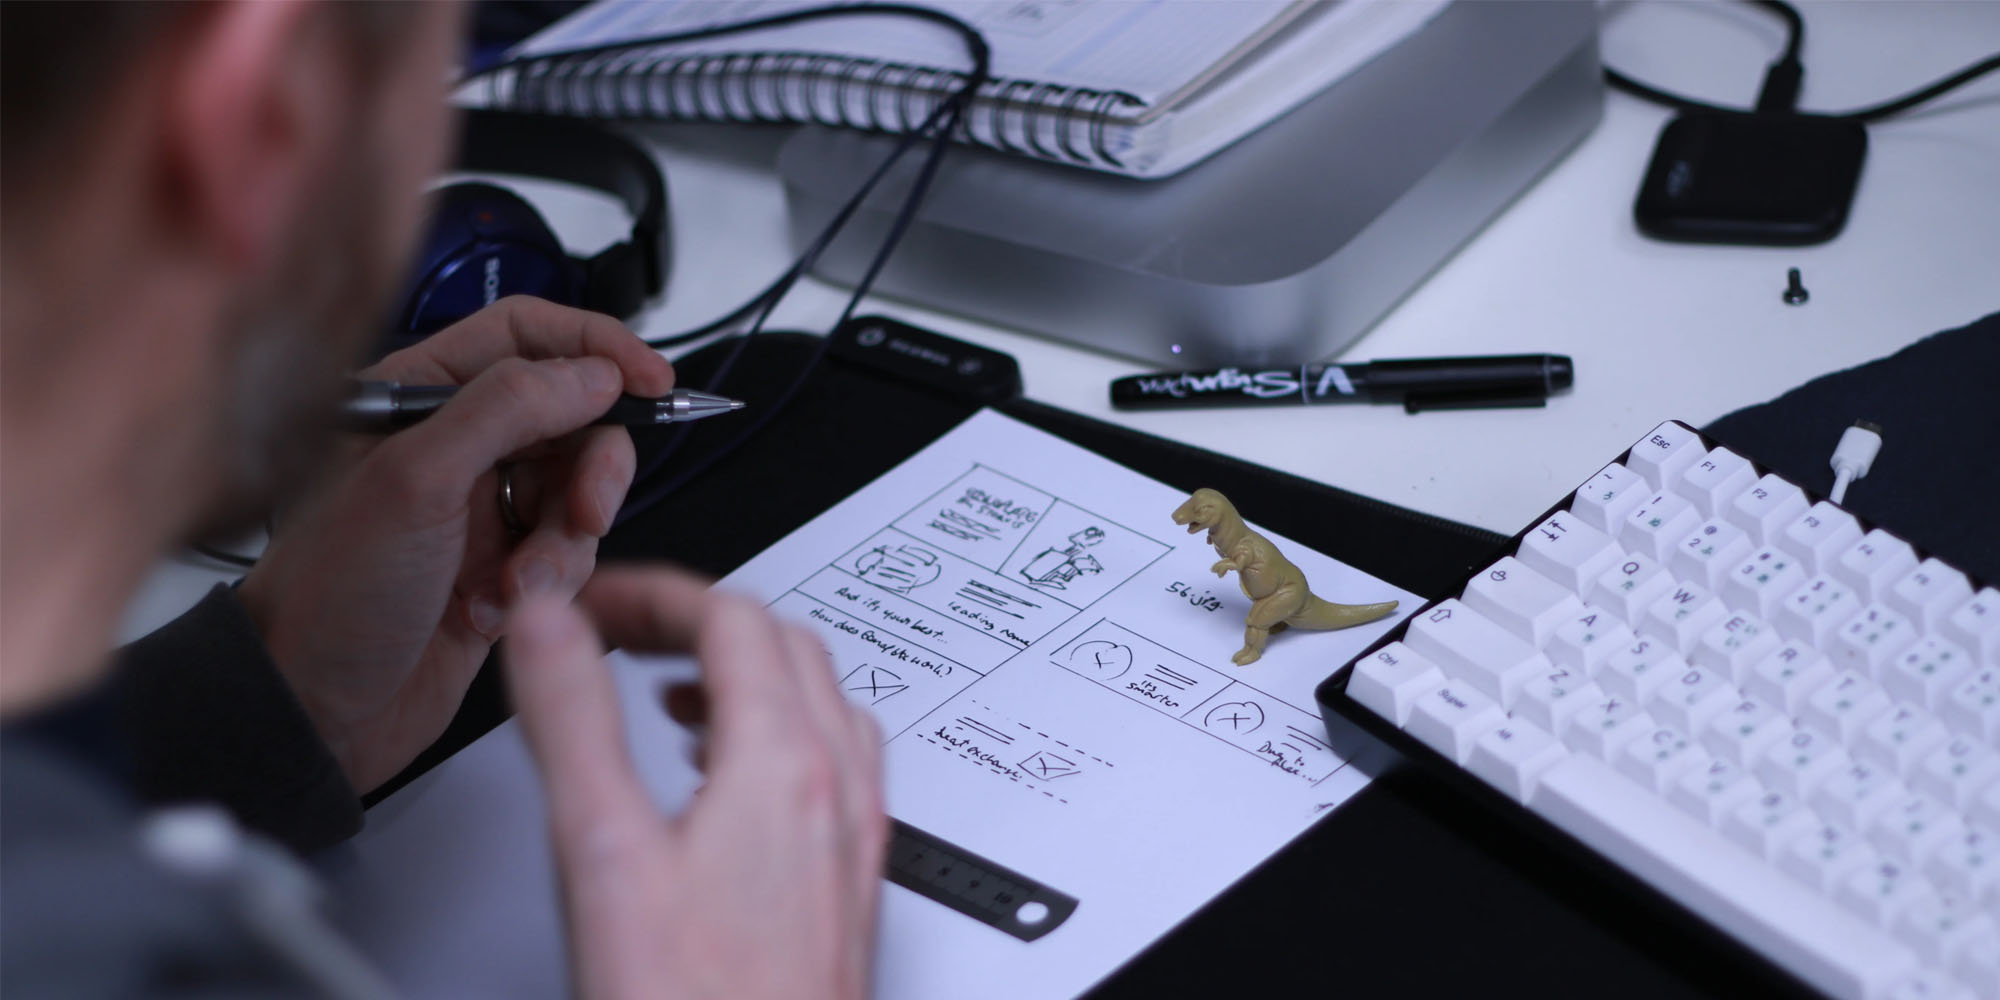 A person drawing layouts on a piece of paper, with a toy dinosaur at a desk